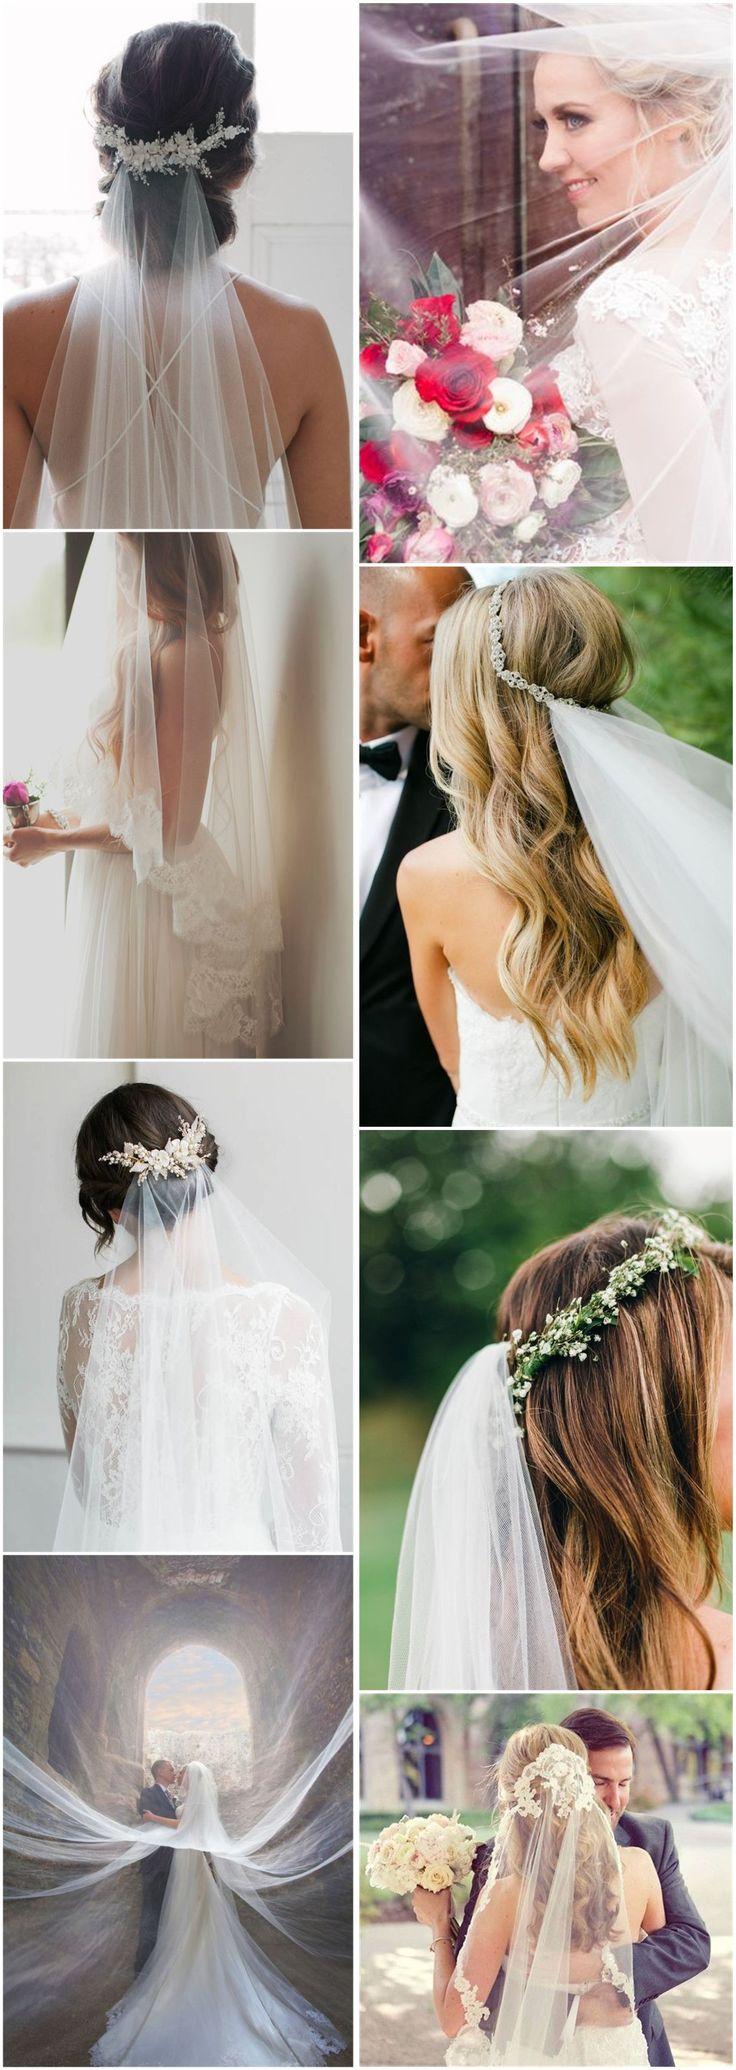 Hochzeit - 21 Wedding Veils You Will Fall In Love With